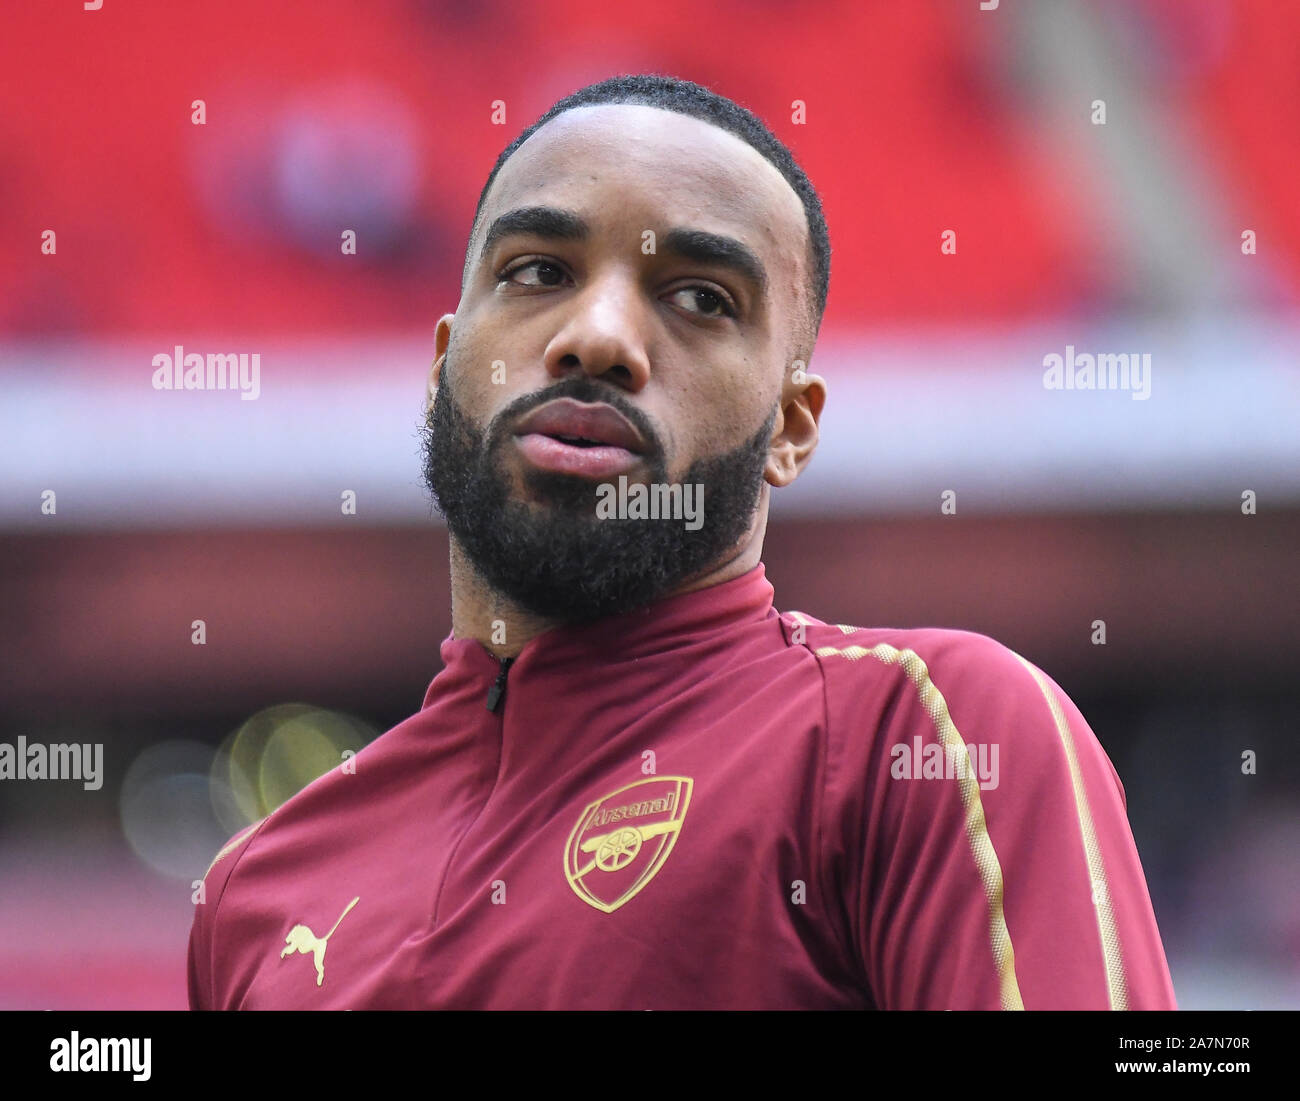 LONDON, ENGLAND - MARCH 2, 2019: Alexandre Lacazette of Arsenal pictured ahead of the 2018/19 Premier League game between Tottenham Hotspur and Arsenal FC at Wembley Stadium. Stock Photo